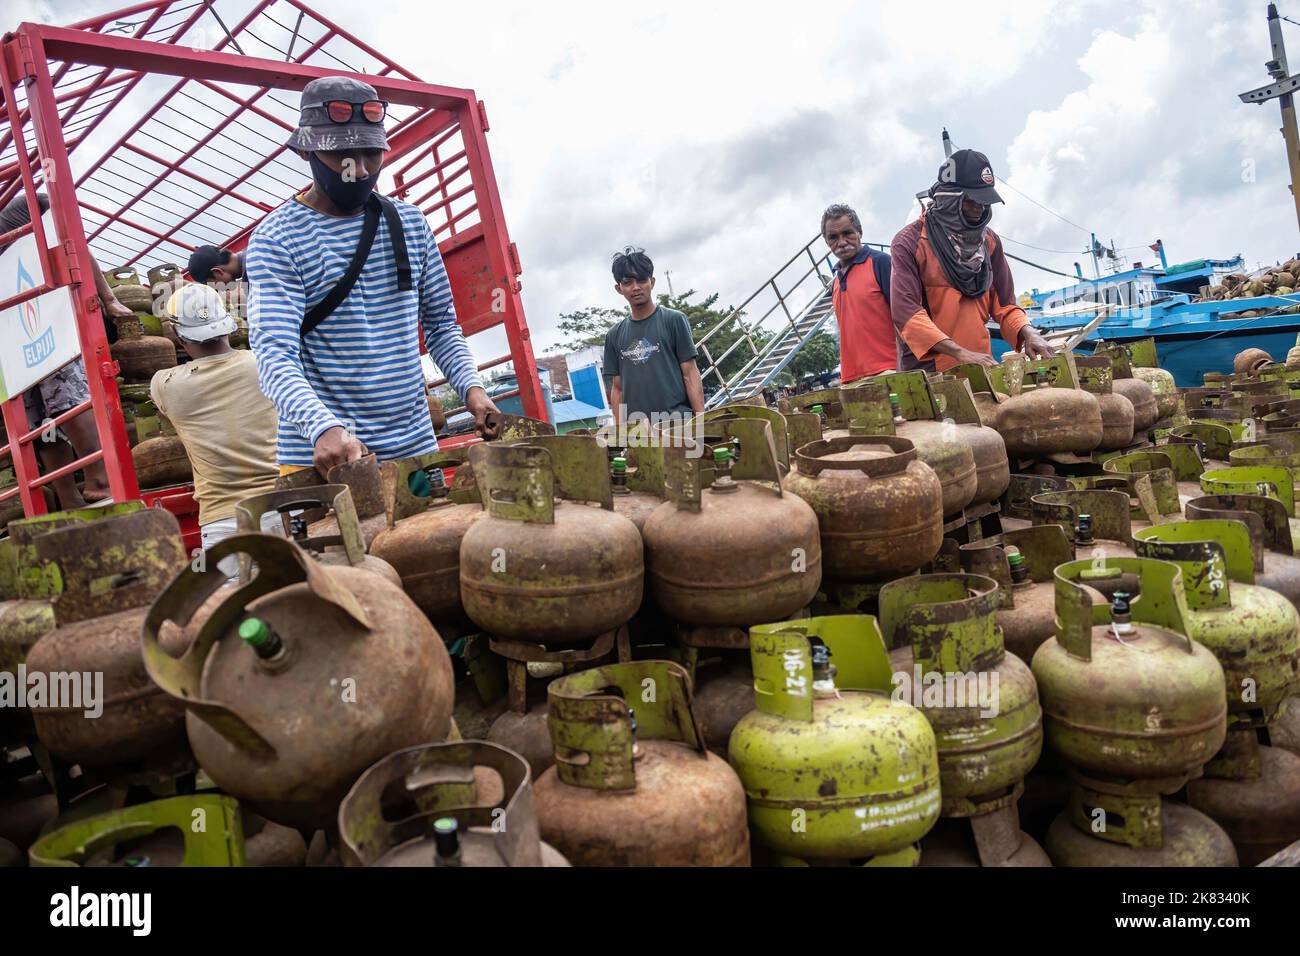 Workers compile 3 kilograms of LPG before being dispatched by ship from Kendari to the Konawe Islands. PT Pertamina Patra Niaga Sulawesi noted that during the period January-September 2022, the supply of three kilograms of LPG to the Konawe Islands Regency in Southeast Sulawesi reached 954.24 metric tons. Stock Photo